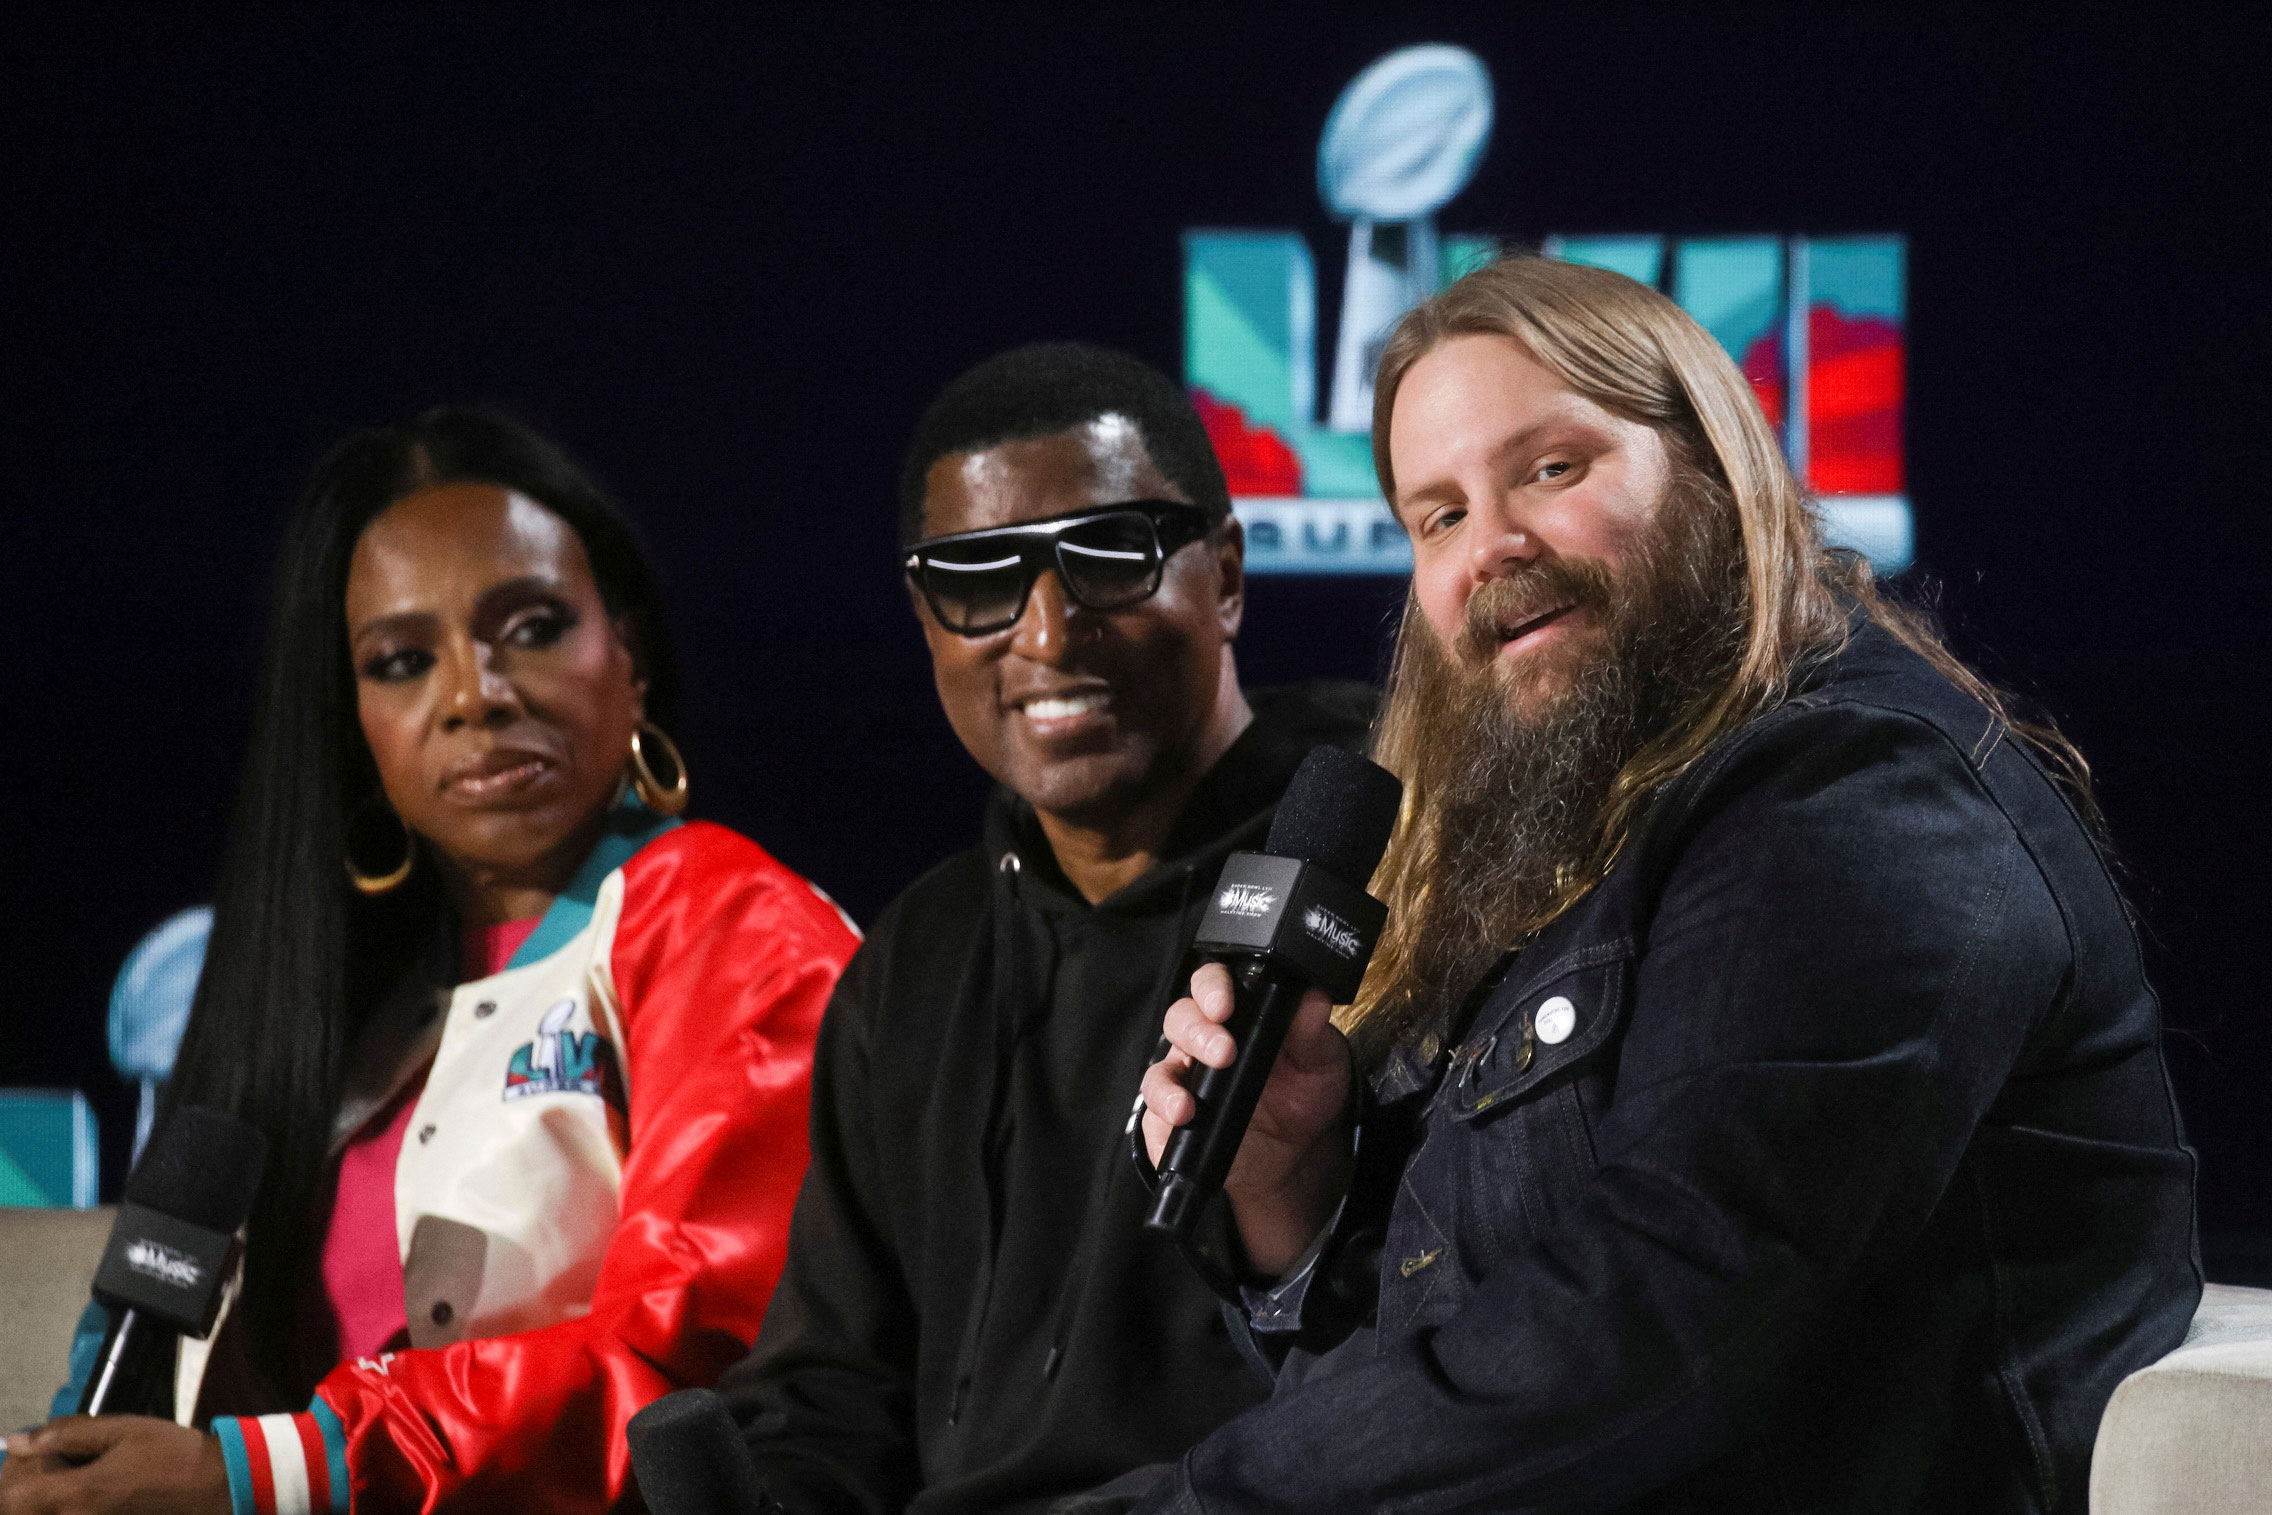 Left to right: Sheryl Lee Ralph, Babyface and Chris Stapleton answer questions at a news conference in Phoenix on Thursday.